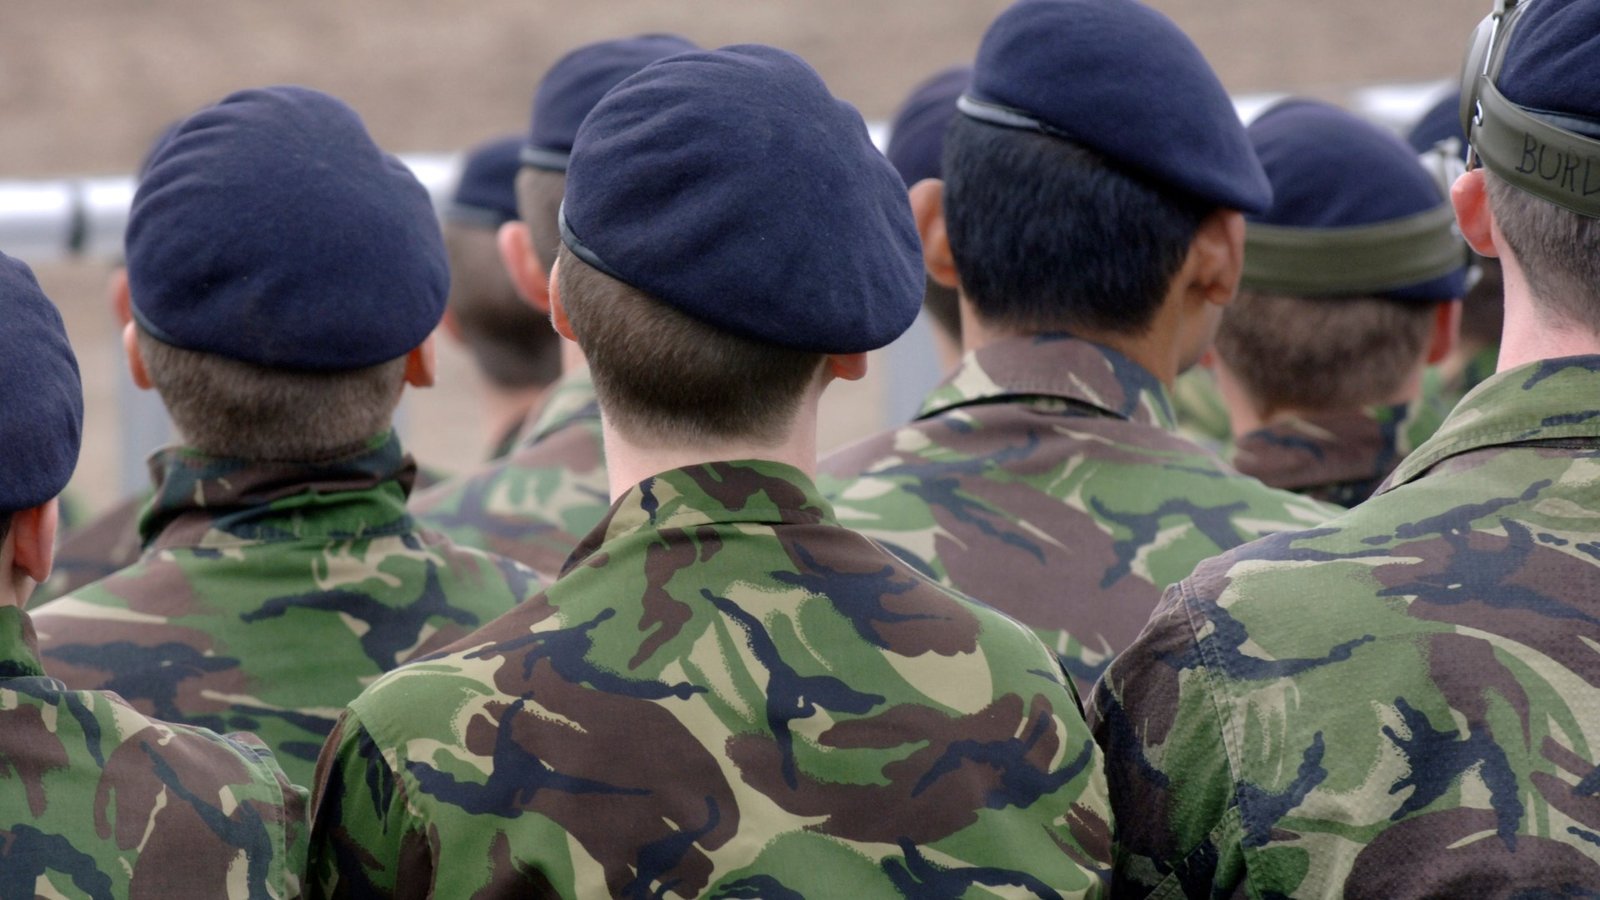 Britain’s top military units failed to reach recruitment targets under Tories, stats show